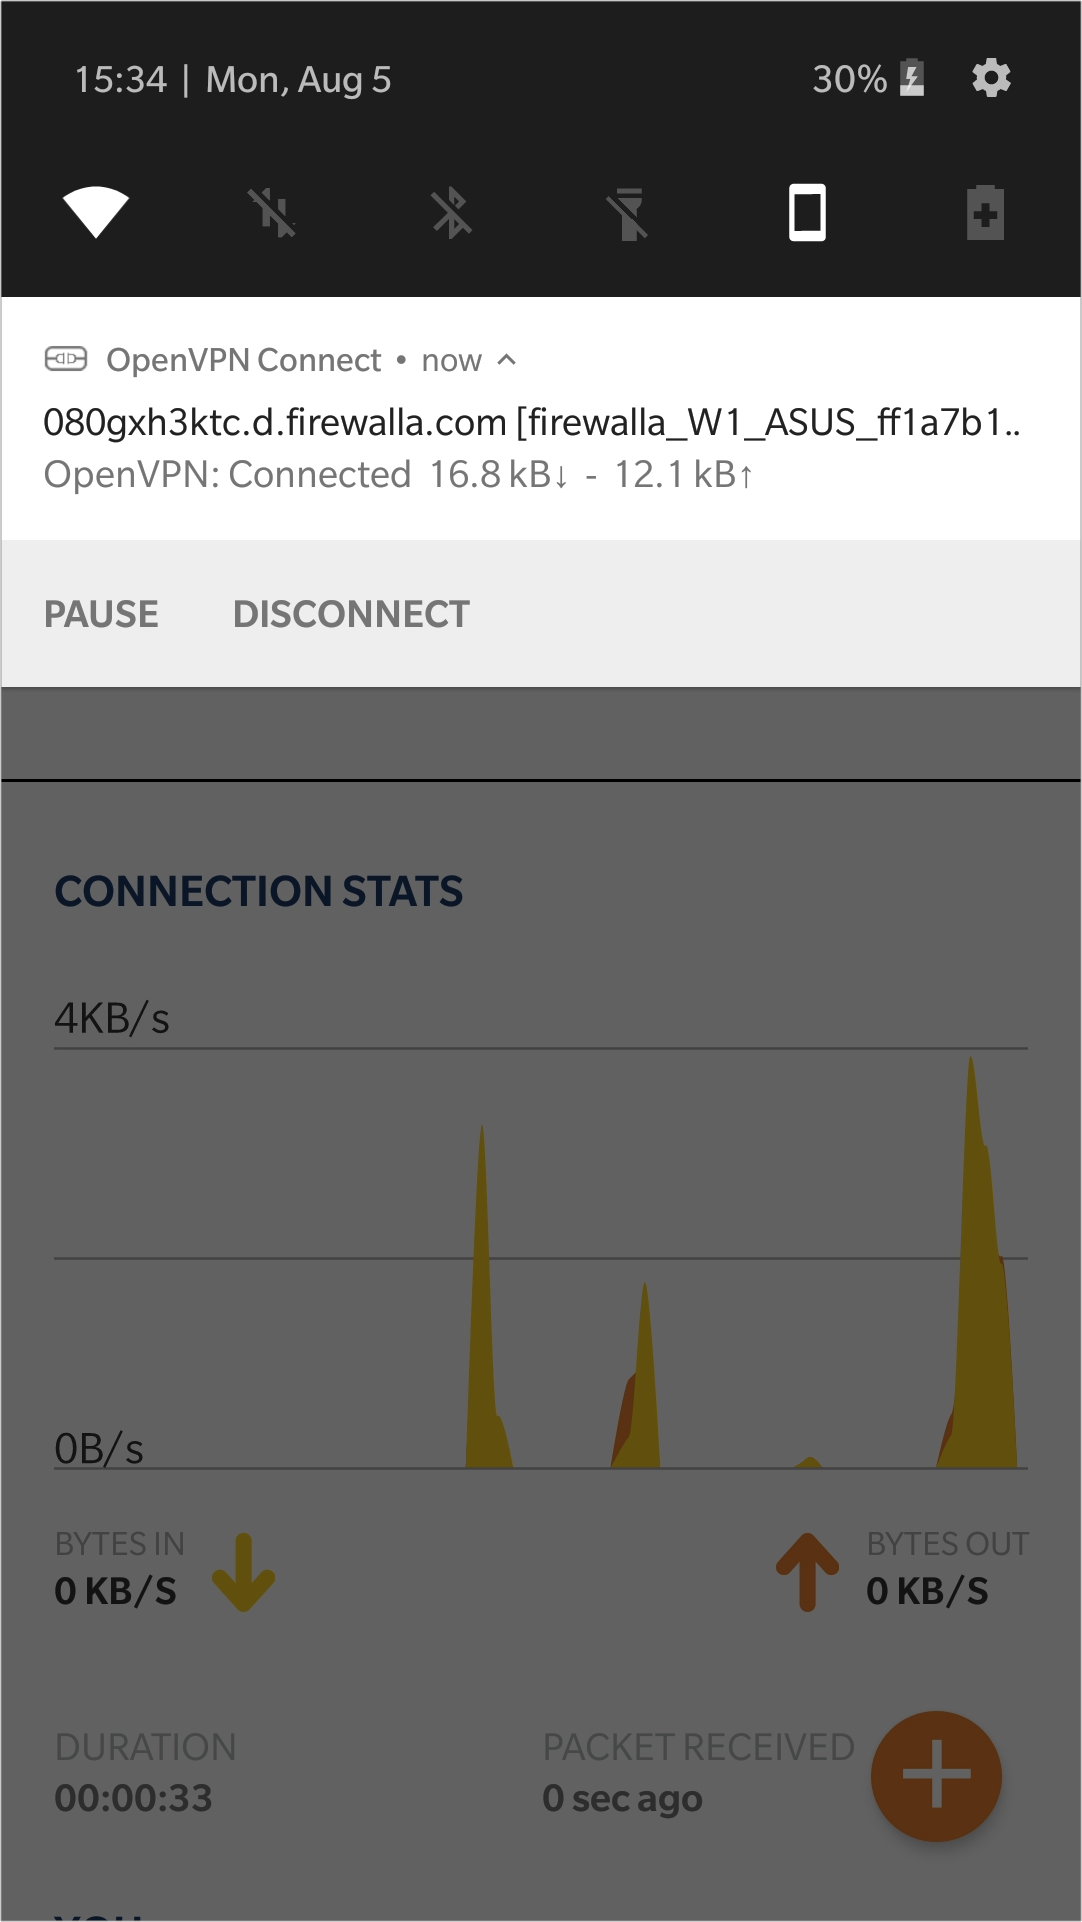 Android VPN client notification about OpenVPN connection